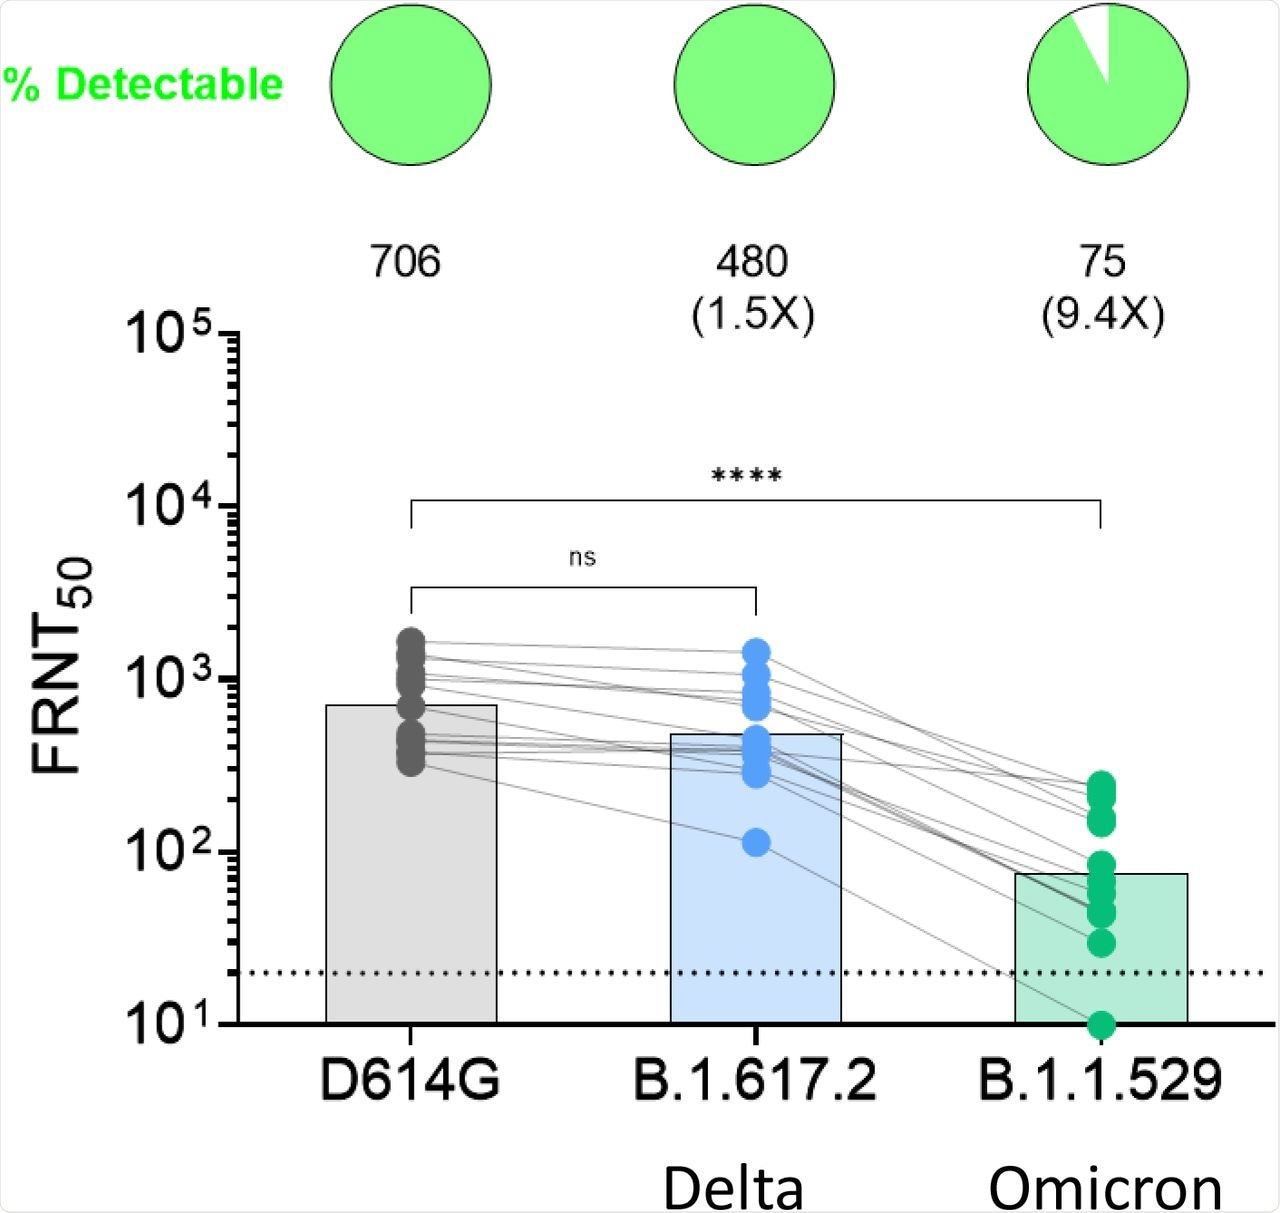 Neutralization antibody responses against D614G, B.1.617.2 (Delta), and B.1.1.529 (Omicron) SARS-CoV-2 variants post-Covaxin booster dosing.